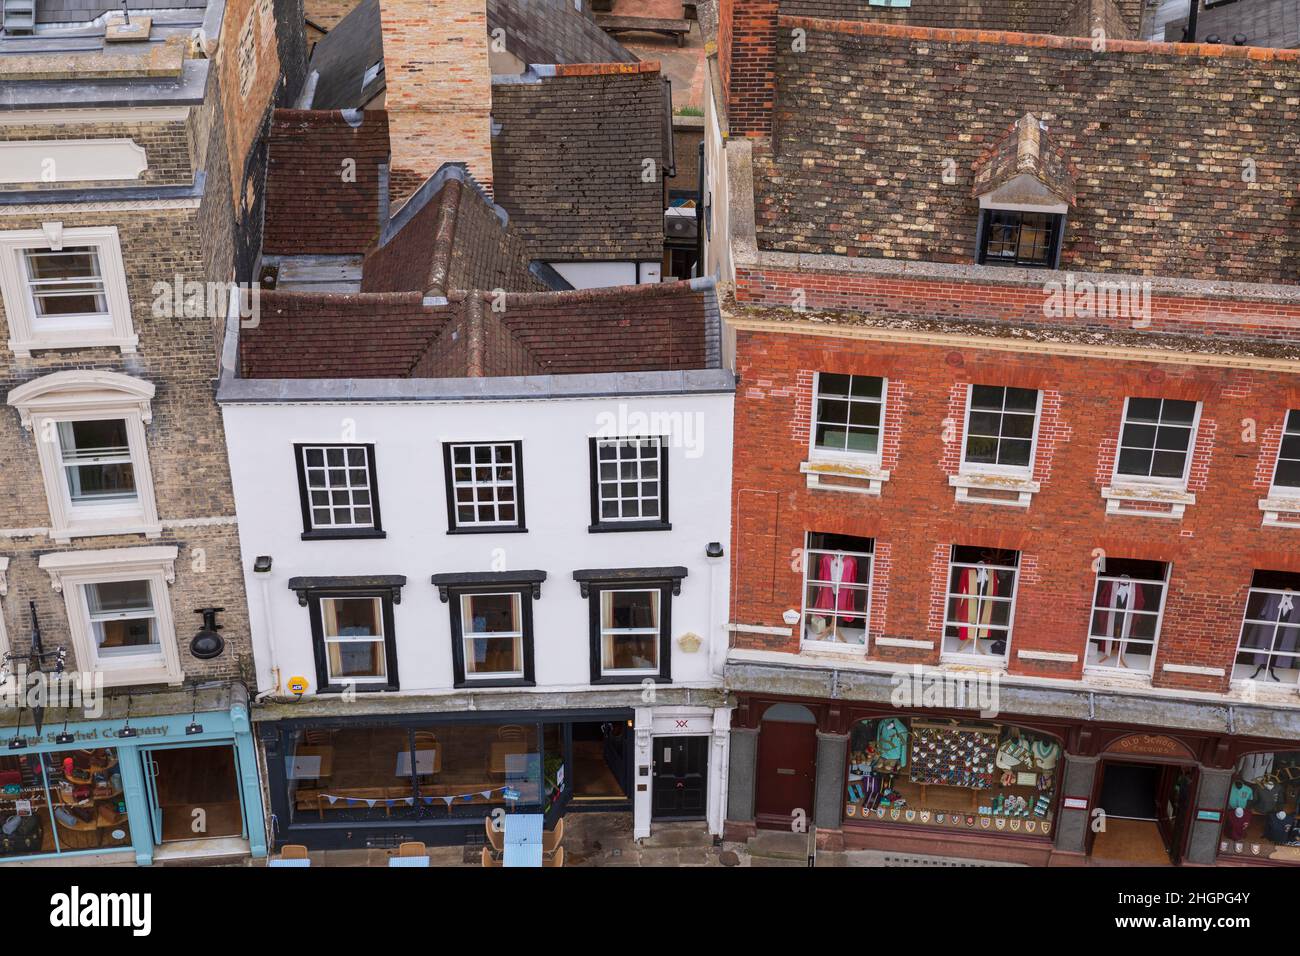 Rooftop view over St. Mary's Passage, Cambridge, England, as seen from the tower of Great St Mary's Church. Stock Photo